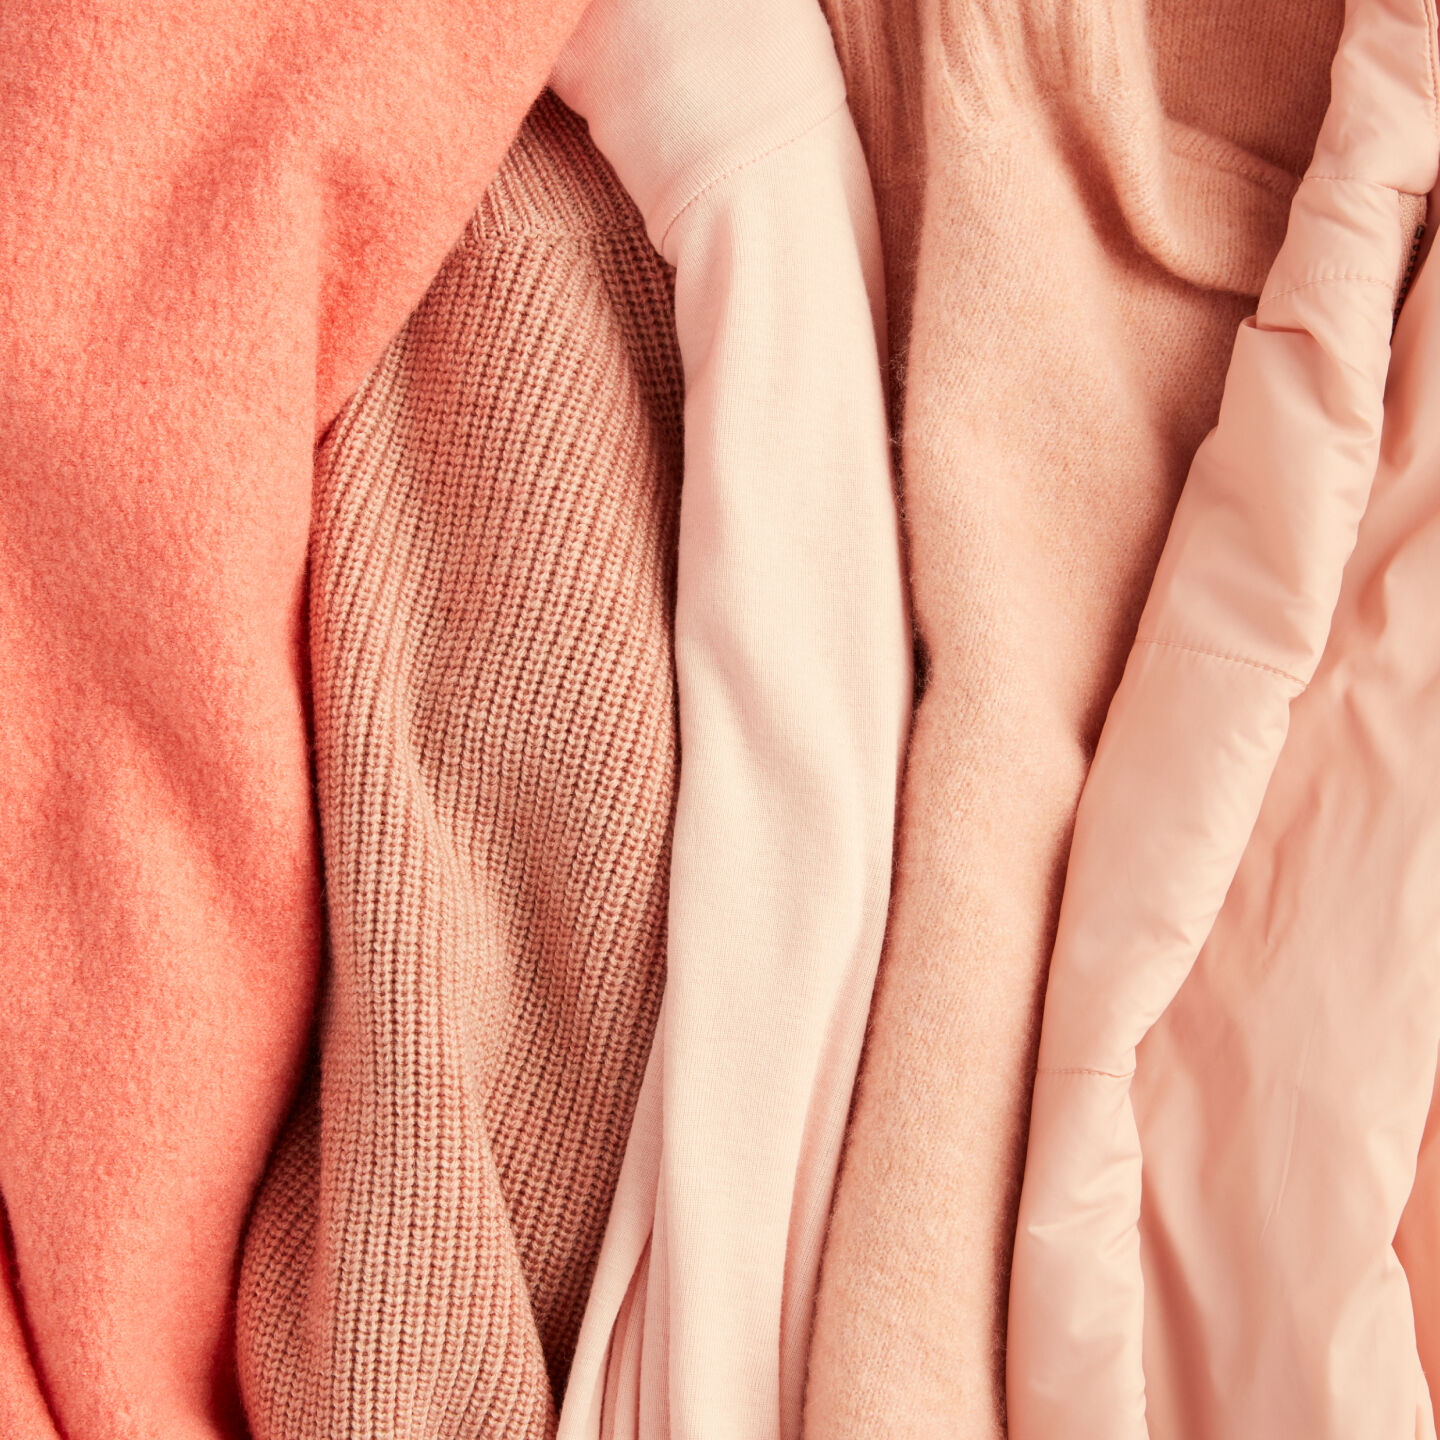 Peach colored sweaters and knits.